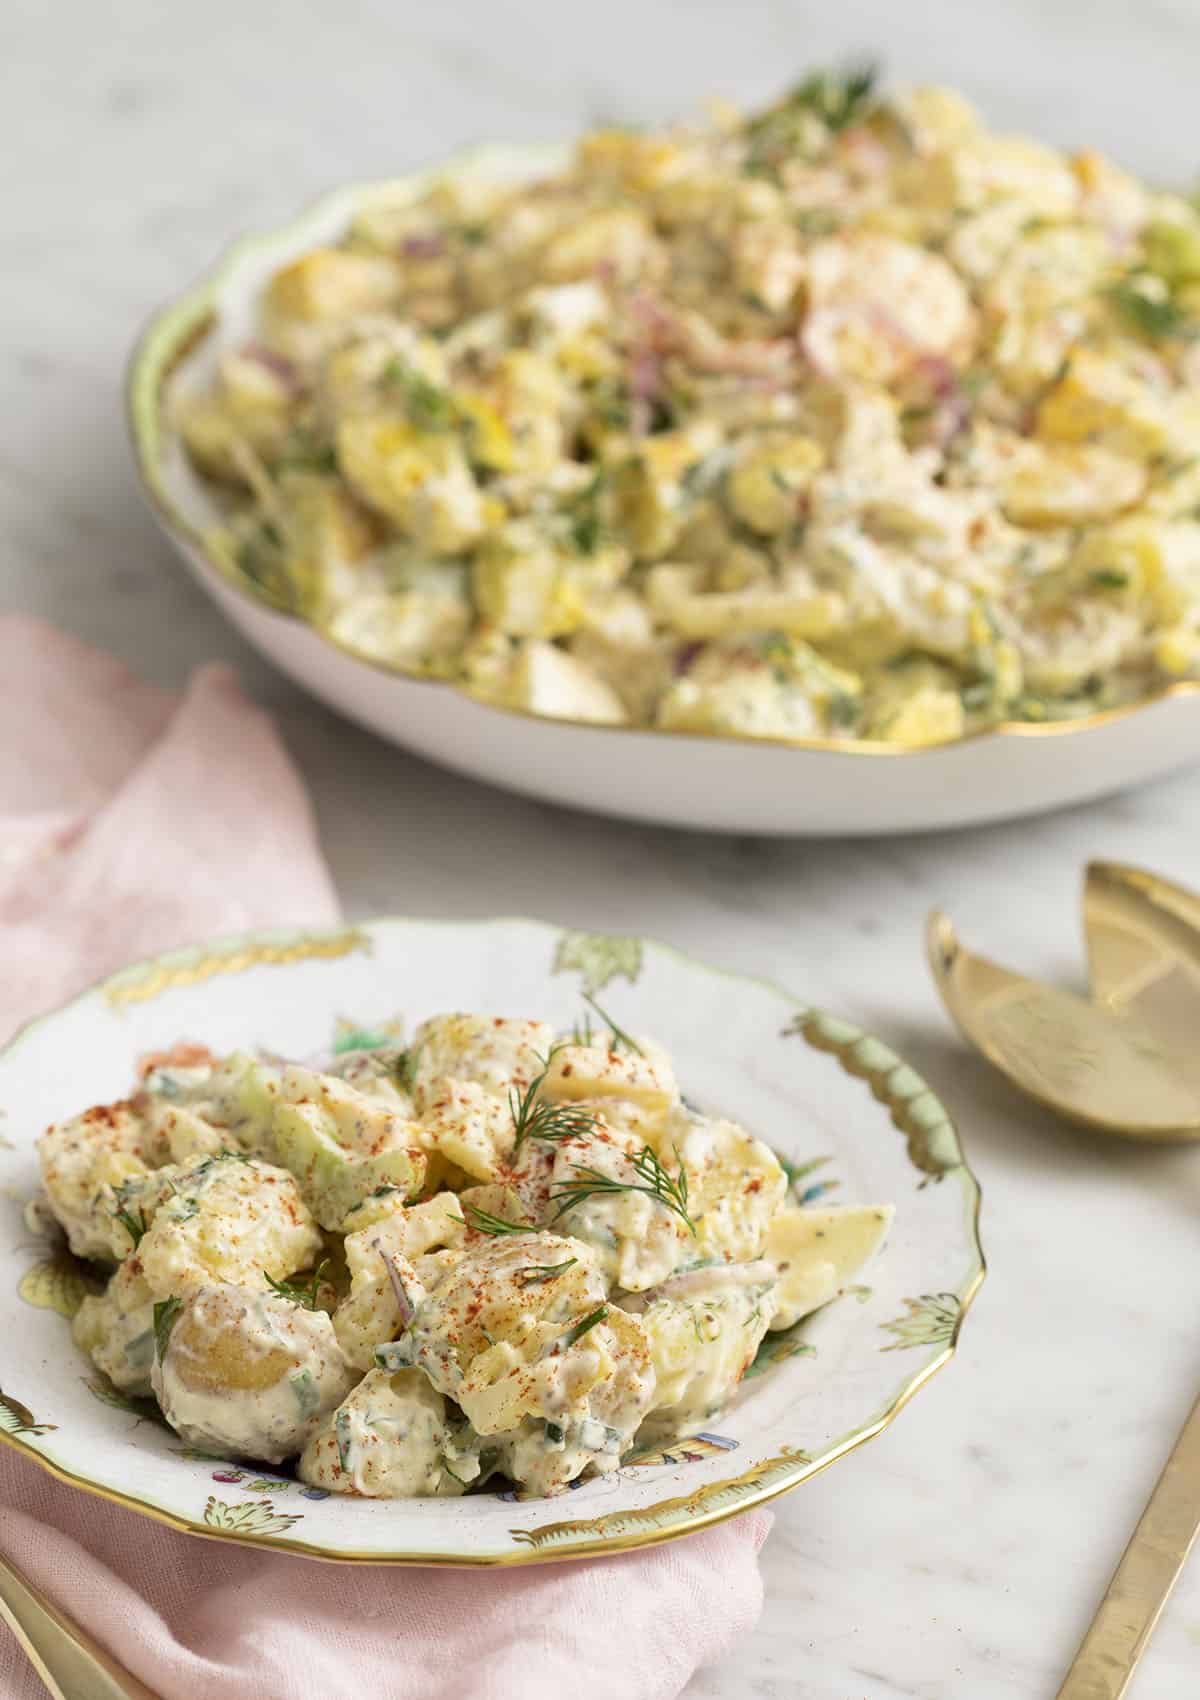 A delicious homemade potato salad on a porcelain plate next to a serving dish.